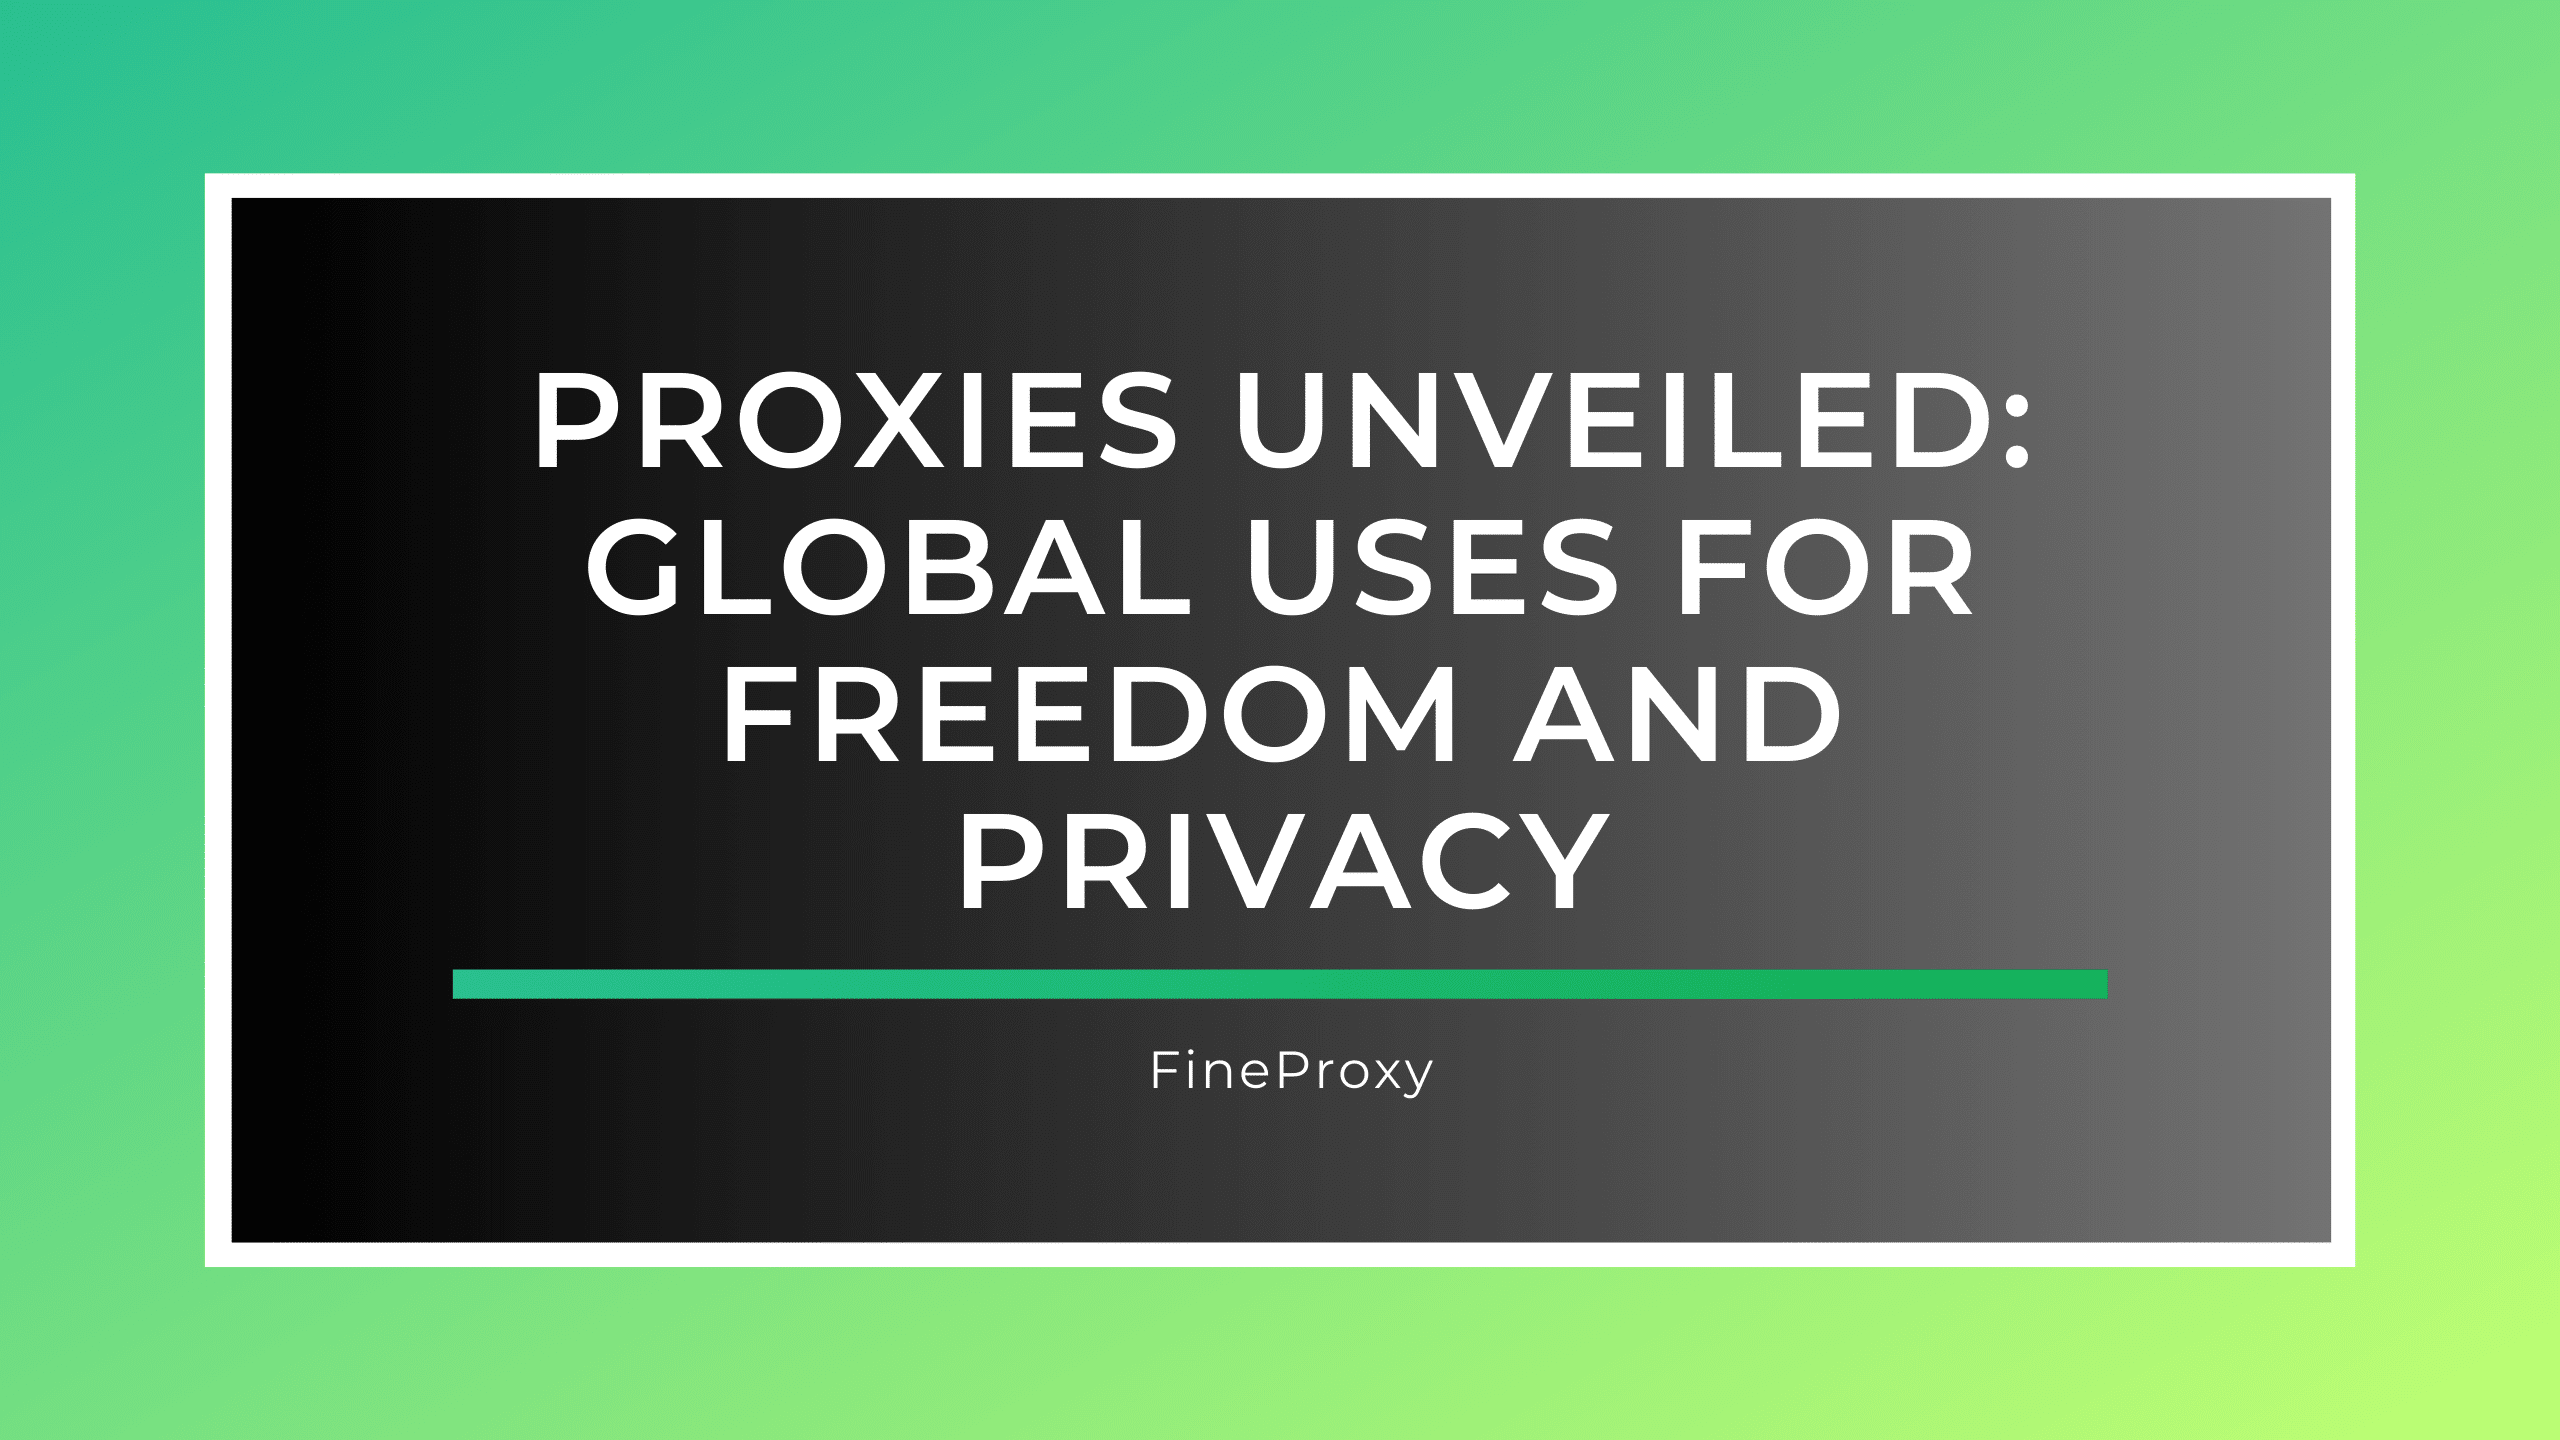 Proxies Unveiled: Global Uses for Freedom and Privacy